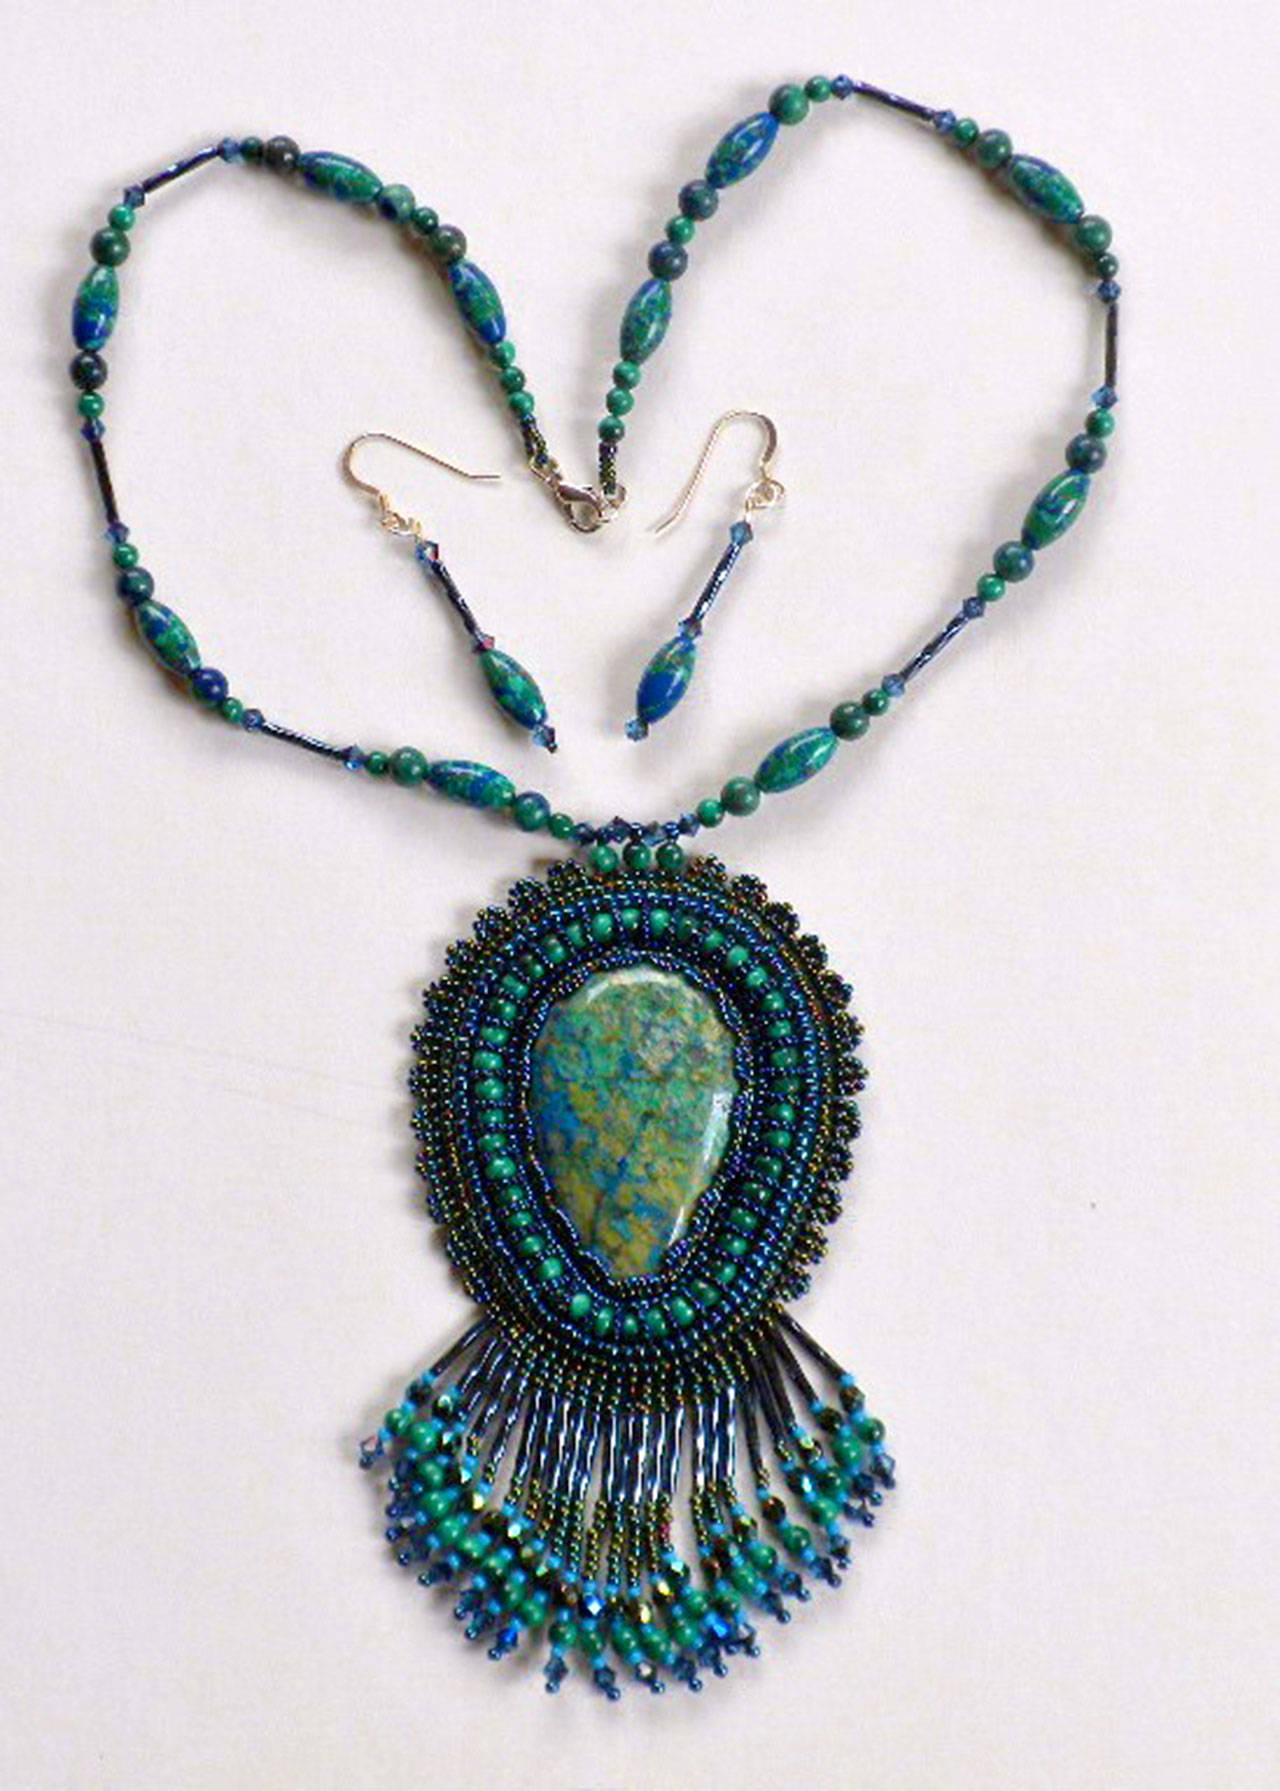 Jewelry made by Gail McLain is featured at Harbor Arts this month in Port Angeles.